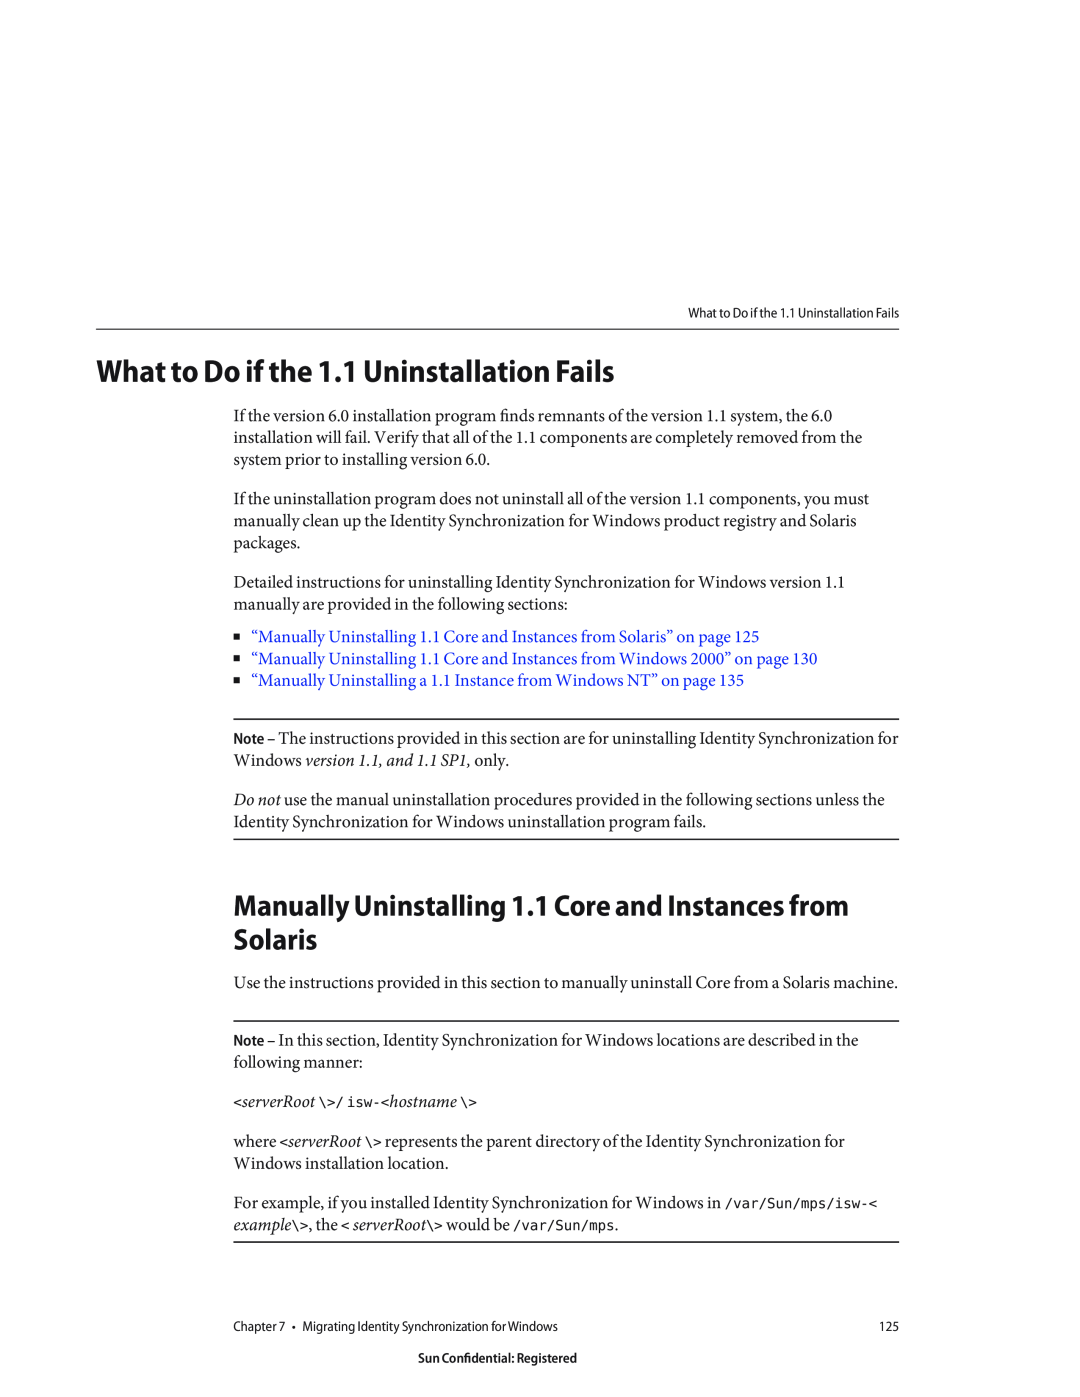 Sun Microsystems 8190994 manual What to Do if the 1.1 Uninstallation Fails, serverRoot \/ isw-hostname 